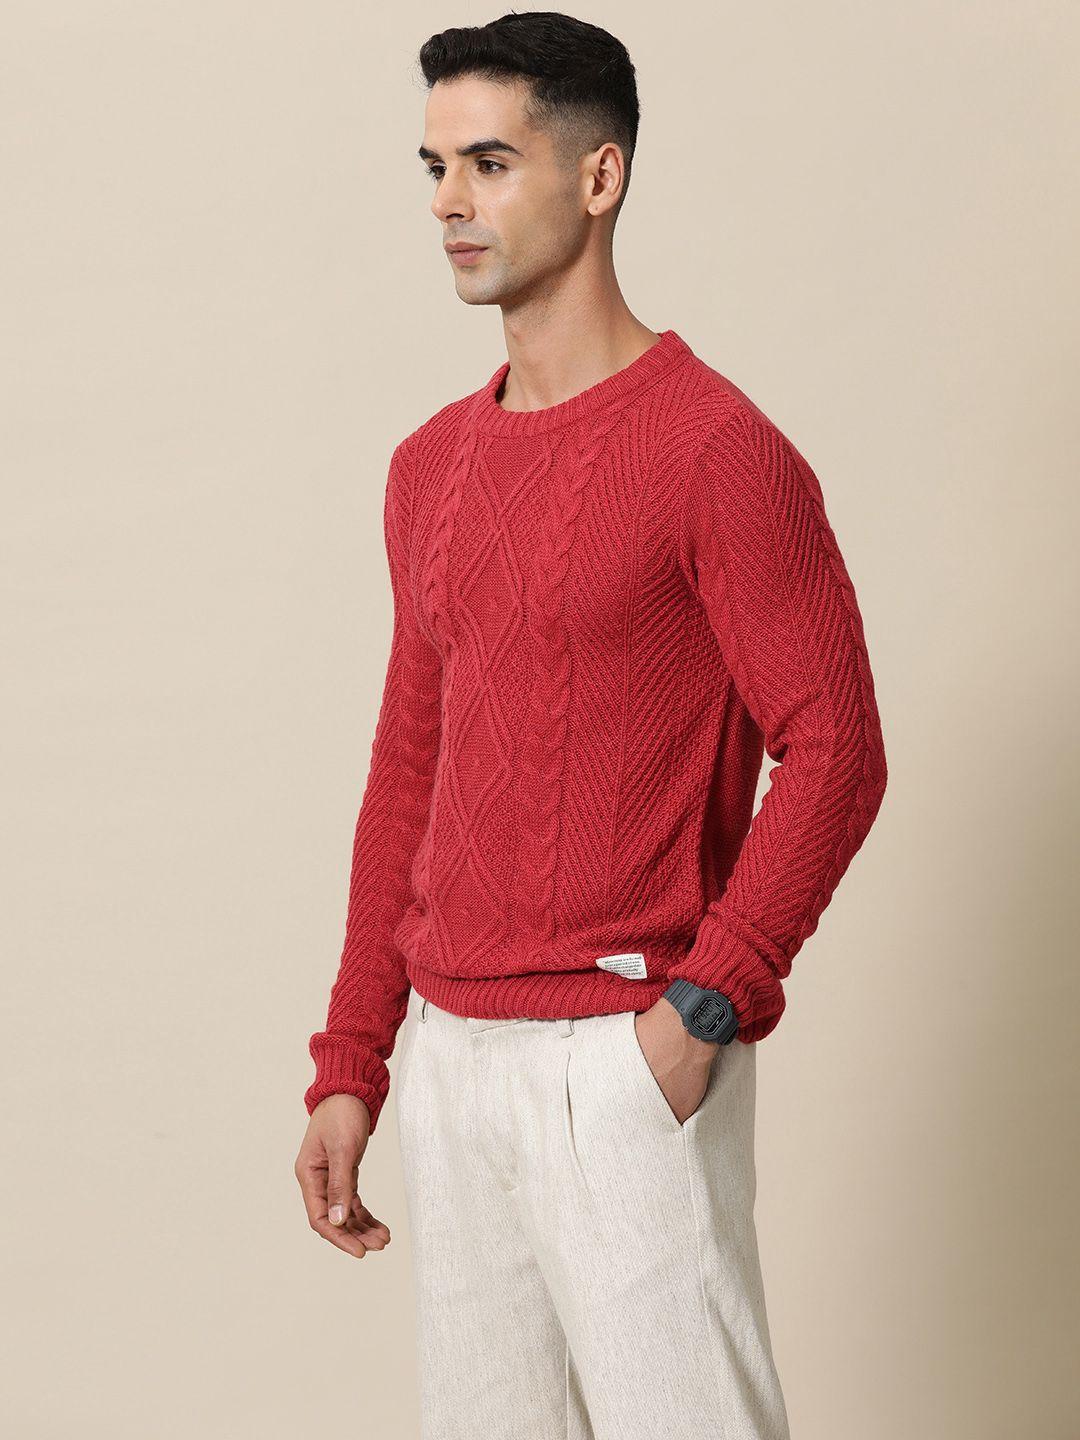 mr-bowerbird-men-solid-cable-ribbed-tailored-fit-pullover